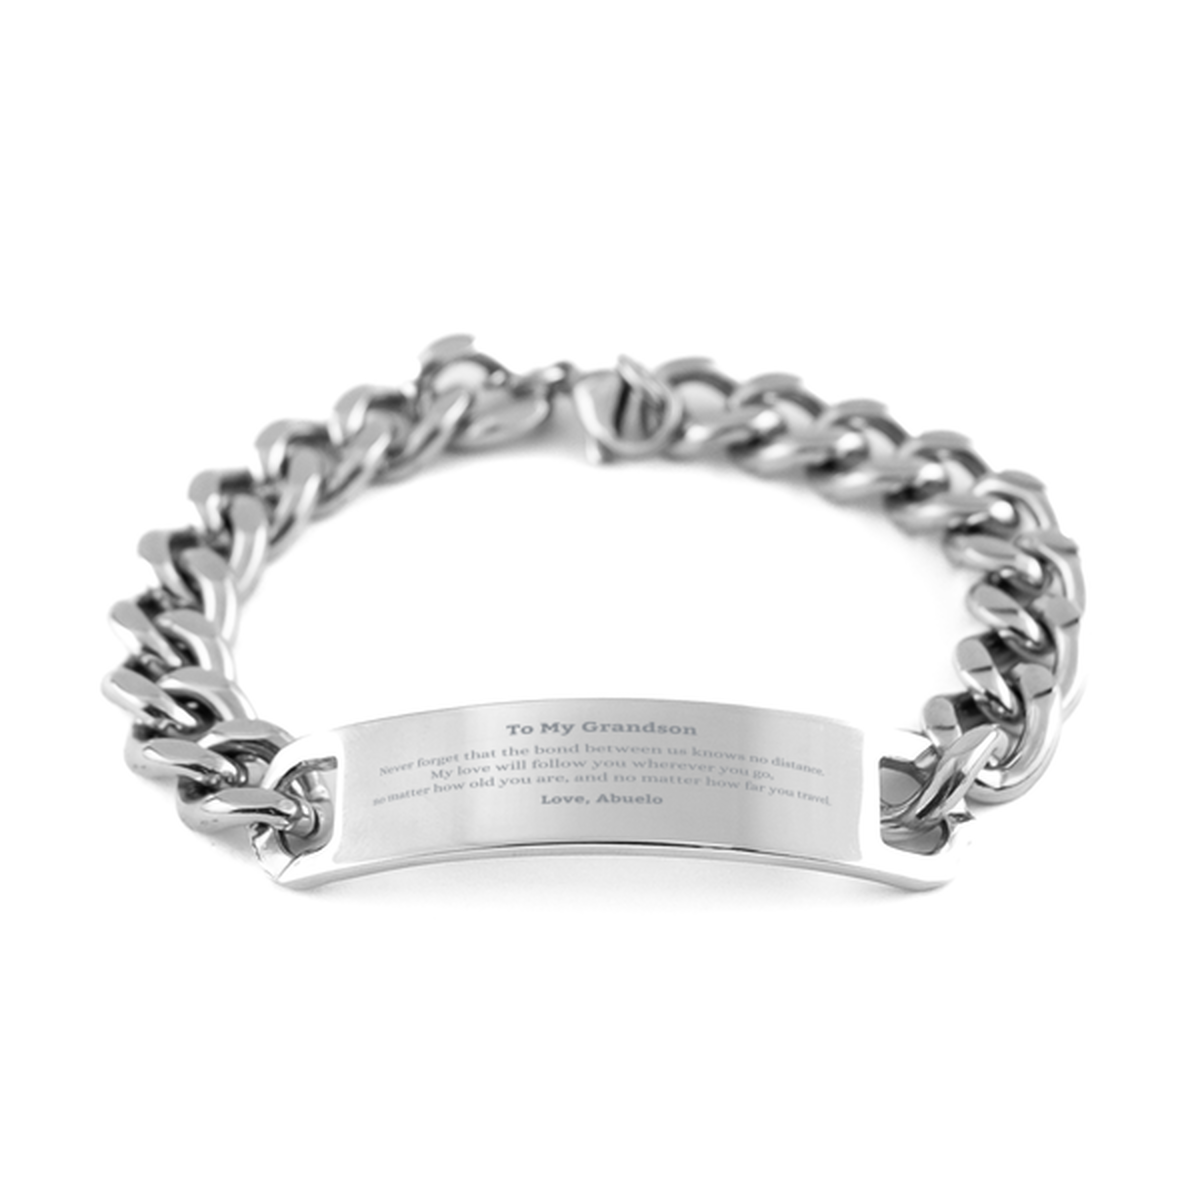 Grandson Birthday Gifts from Abuelo, Adjustable Cuban Chain Stainless Steel Bracelet for Grandson Christmas Graduation Unique Gifts Grandson Never forget that the bond between us knows no distance. Love, Abuelo